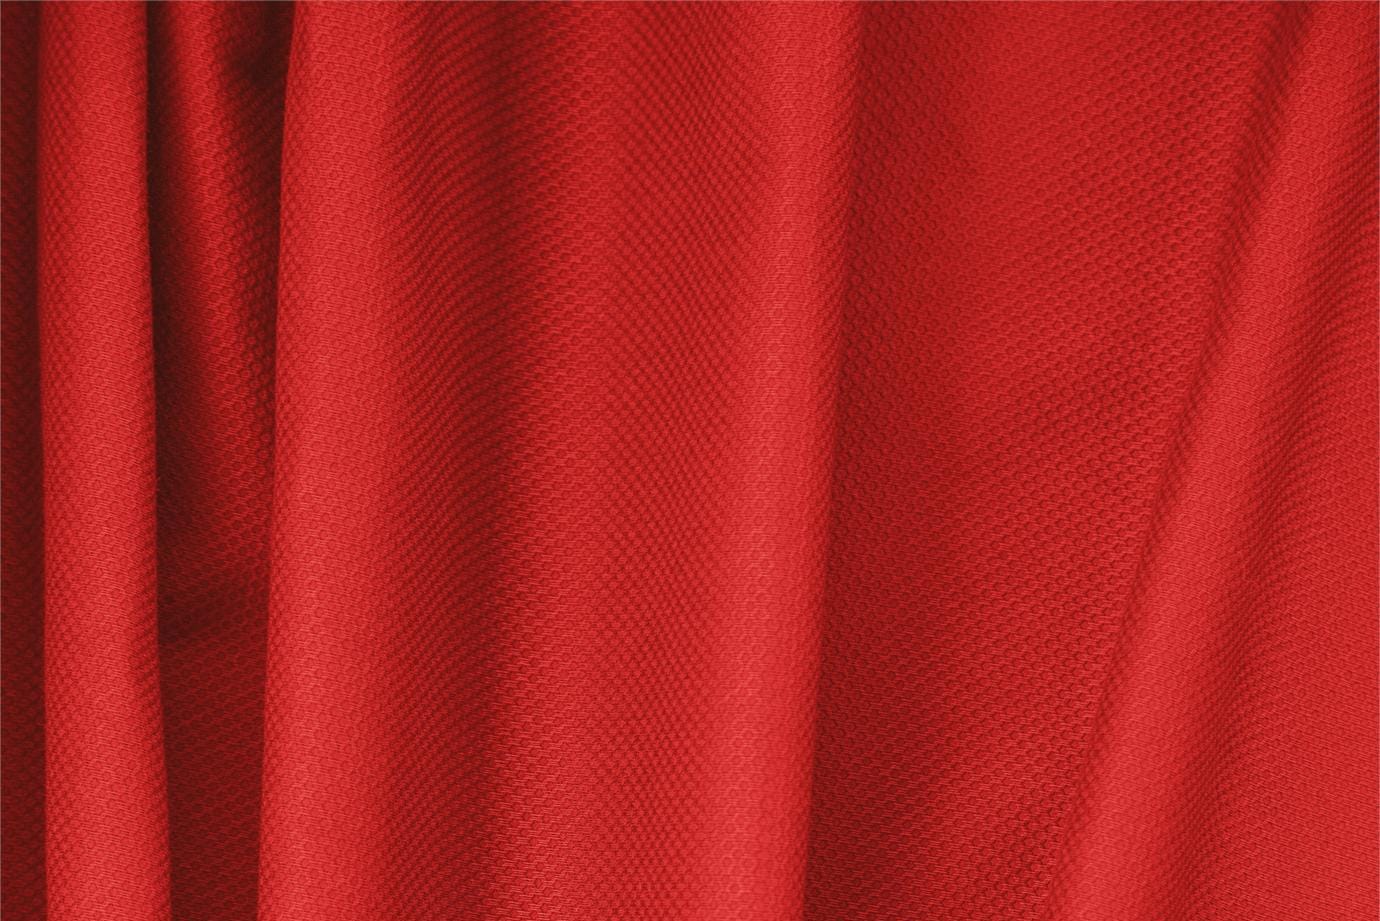 Fire Red Cotton, Stretch Pique Stretch fabric for dressmaking